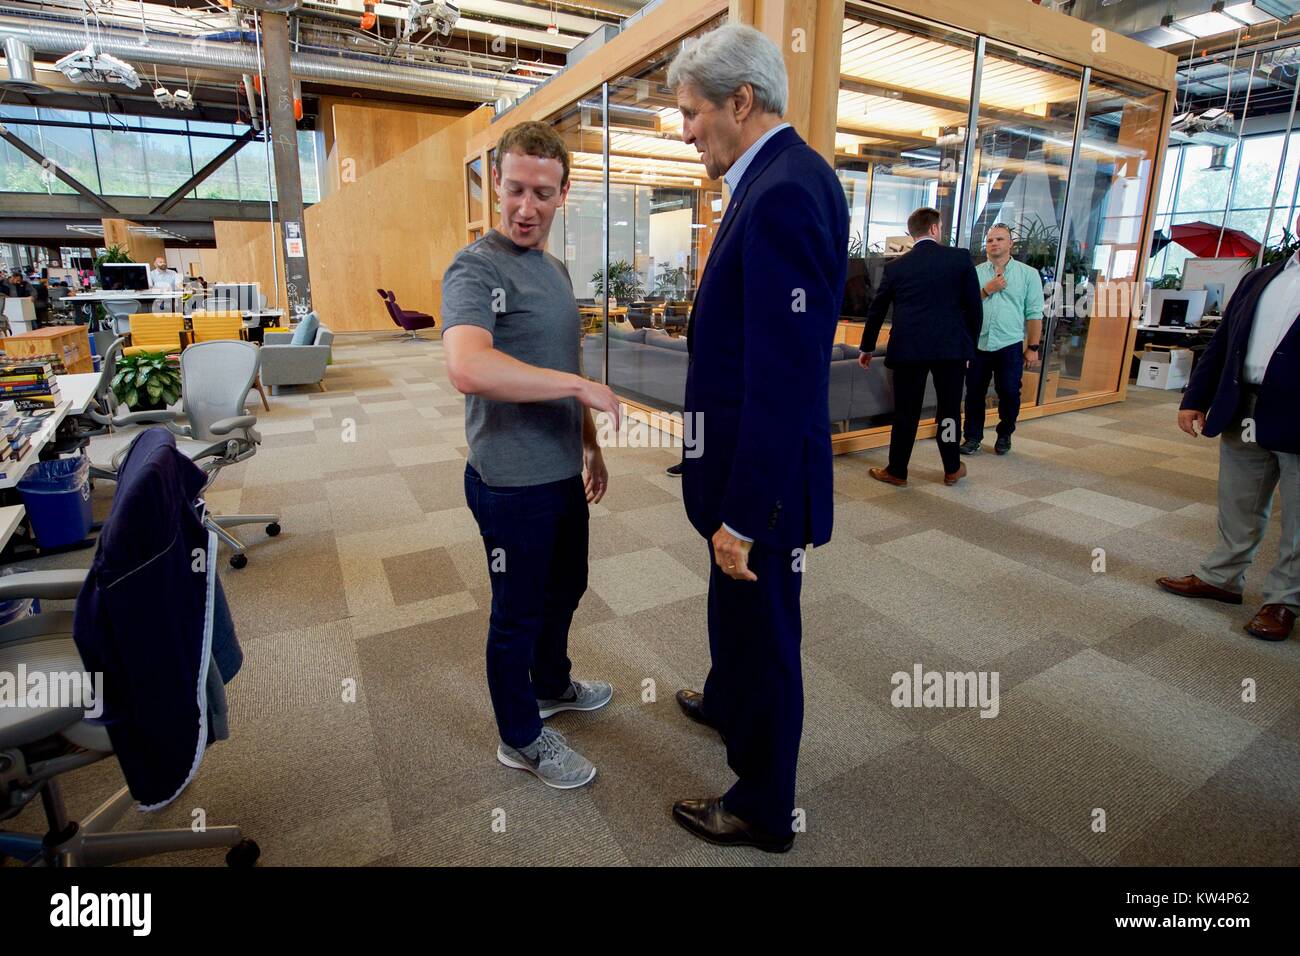 US Secretary of State John Kerry speaking with Facebook CEO Mark Zuckerberg at Facebook headquarters, Menlo Park, California, 2016. Image courtesy US Department of State. Stock Photo